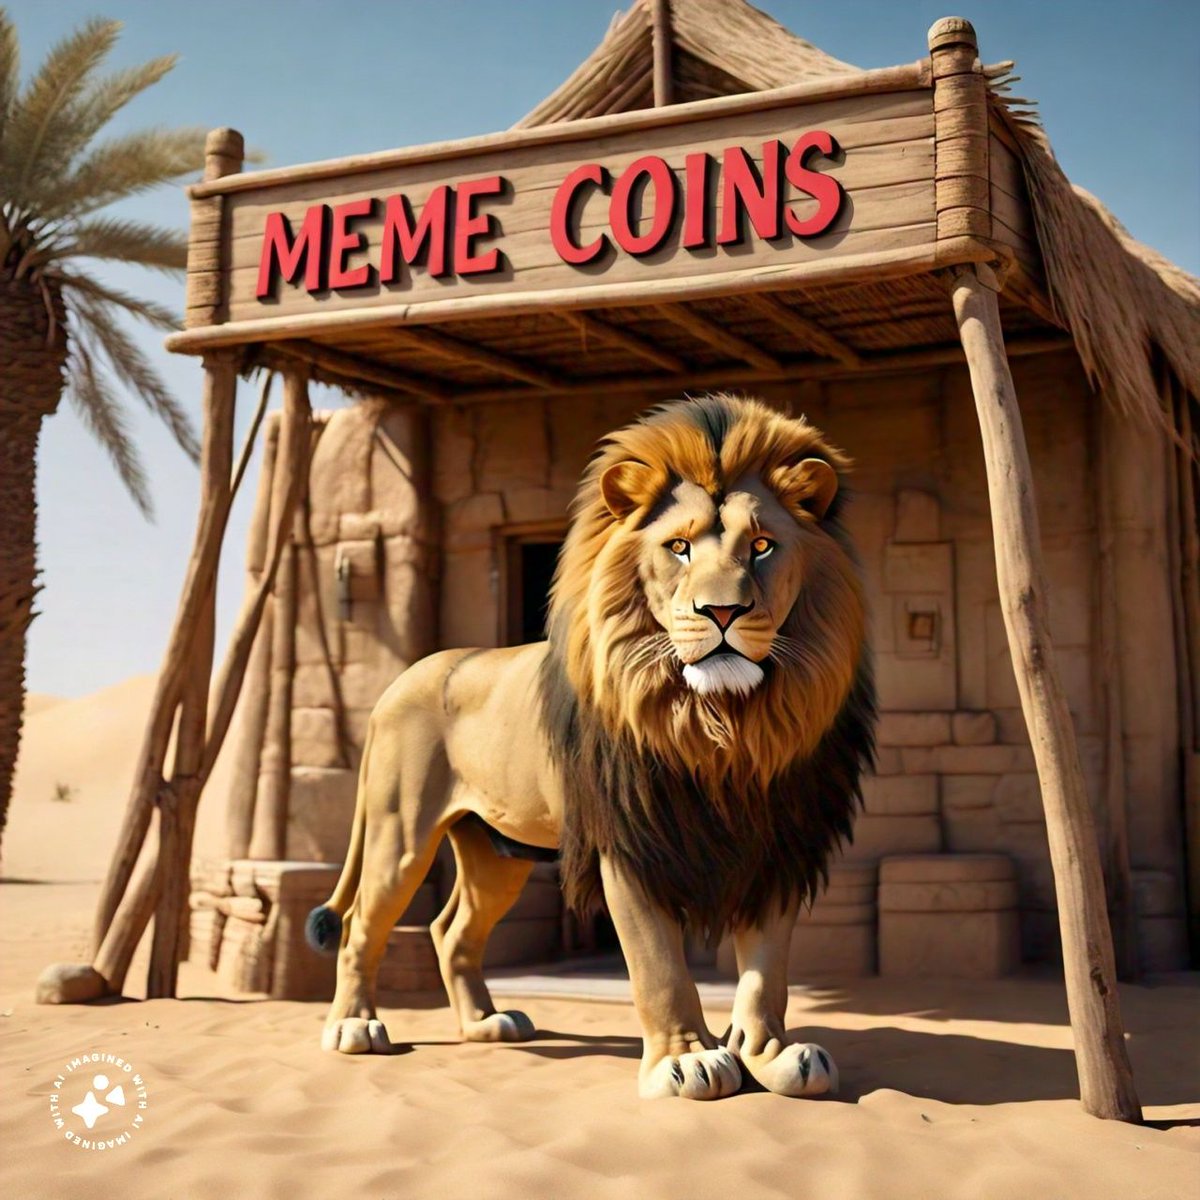 🛑 It's #memecoins check post , drop  and shill me your favorite #memecoin here 🦁 

#solana #bsc #base #Erc20 #ERC404 #bsc #bscgems #SolanaMemeCoins #SolanaCommunity $Gme #GameStop #100xgem #100xDevs #1000xGems #Bitcoin $Btc